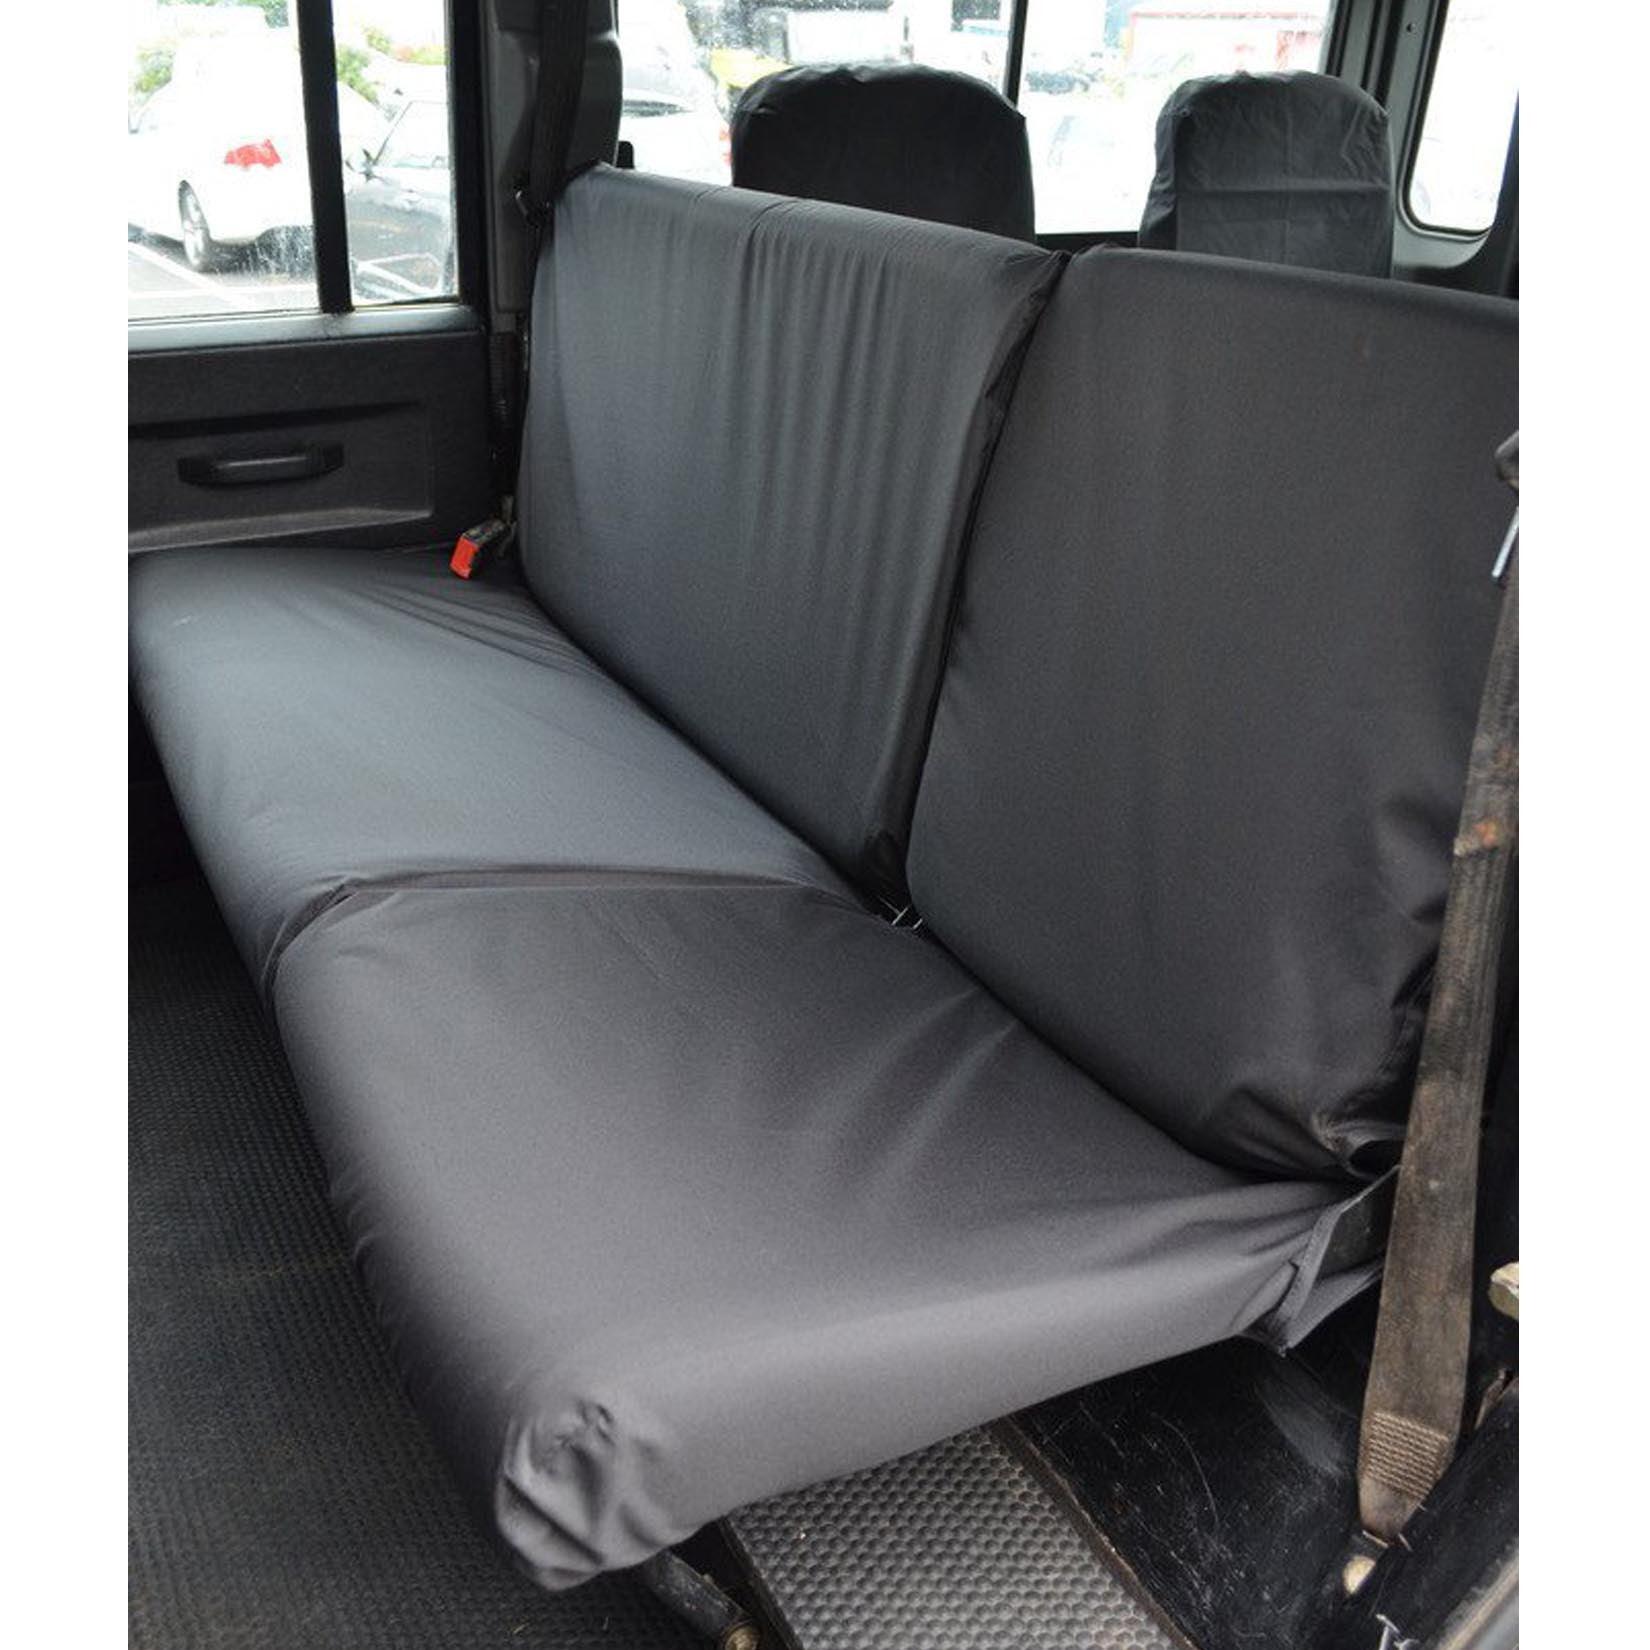 LAND ROVER DEFENDER 1983-2007 90 110 - REAR DOUBLE AND SINGLE SEAT COVERS – BLACK - Storm Xccessories2